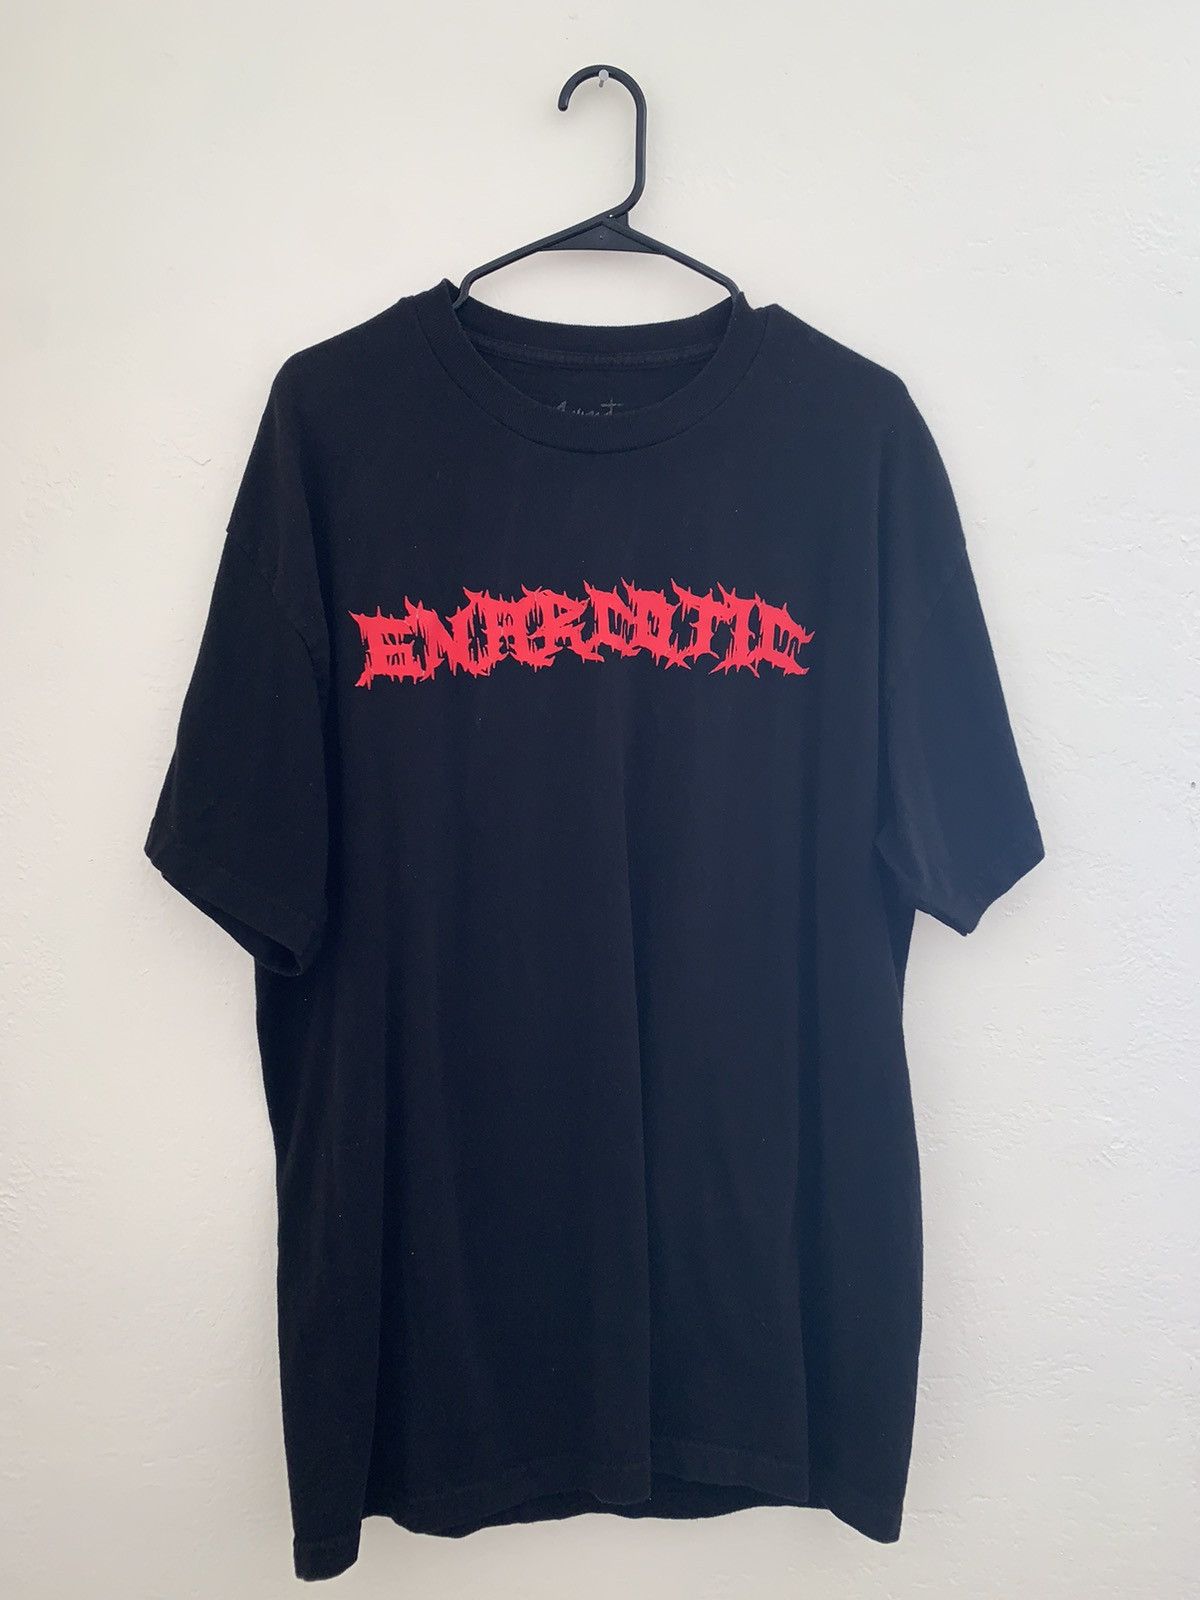 Gnarcotic Gnarcotic rock tee shirt | Grailed